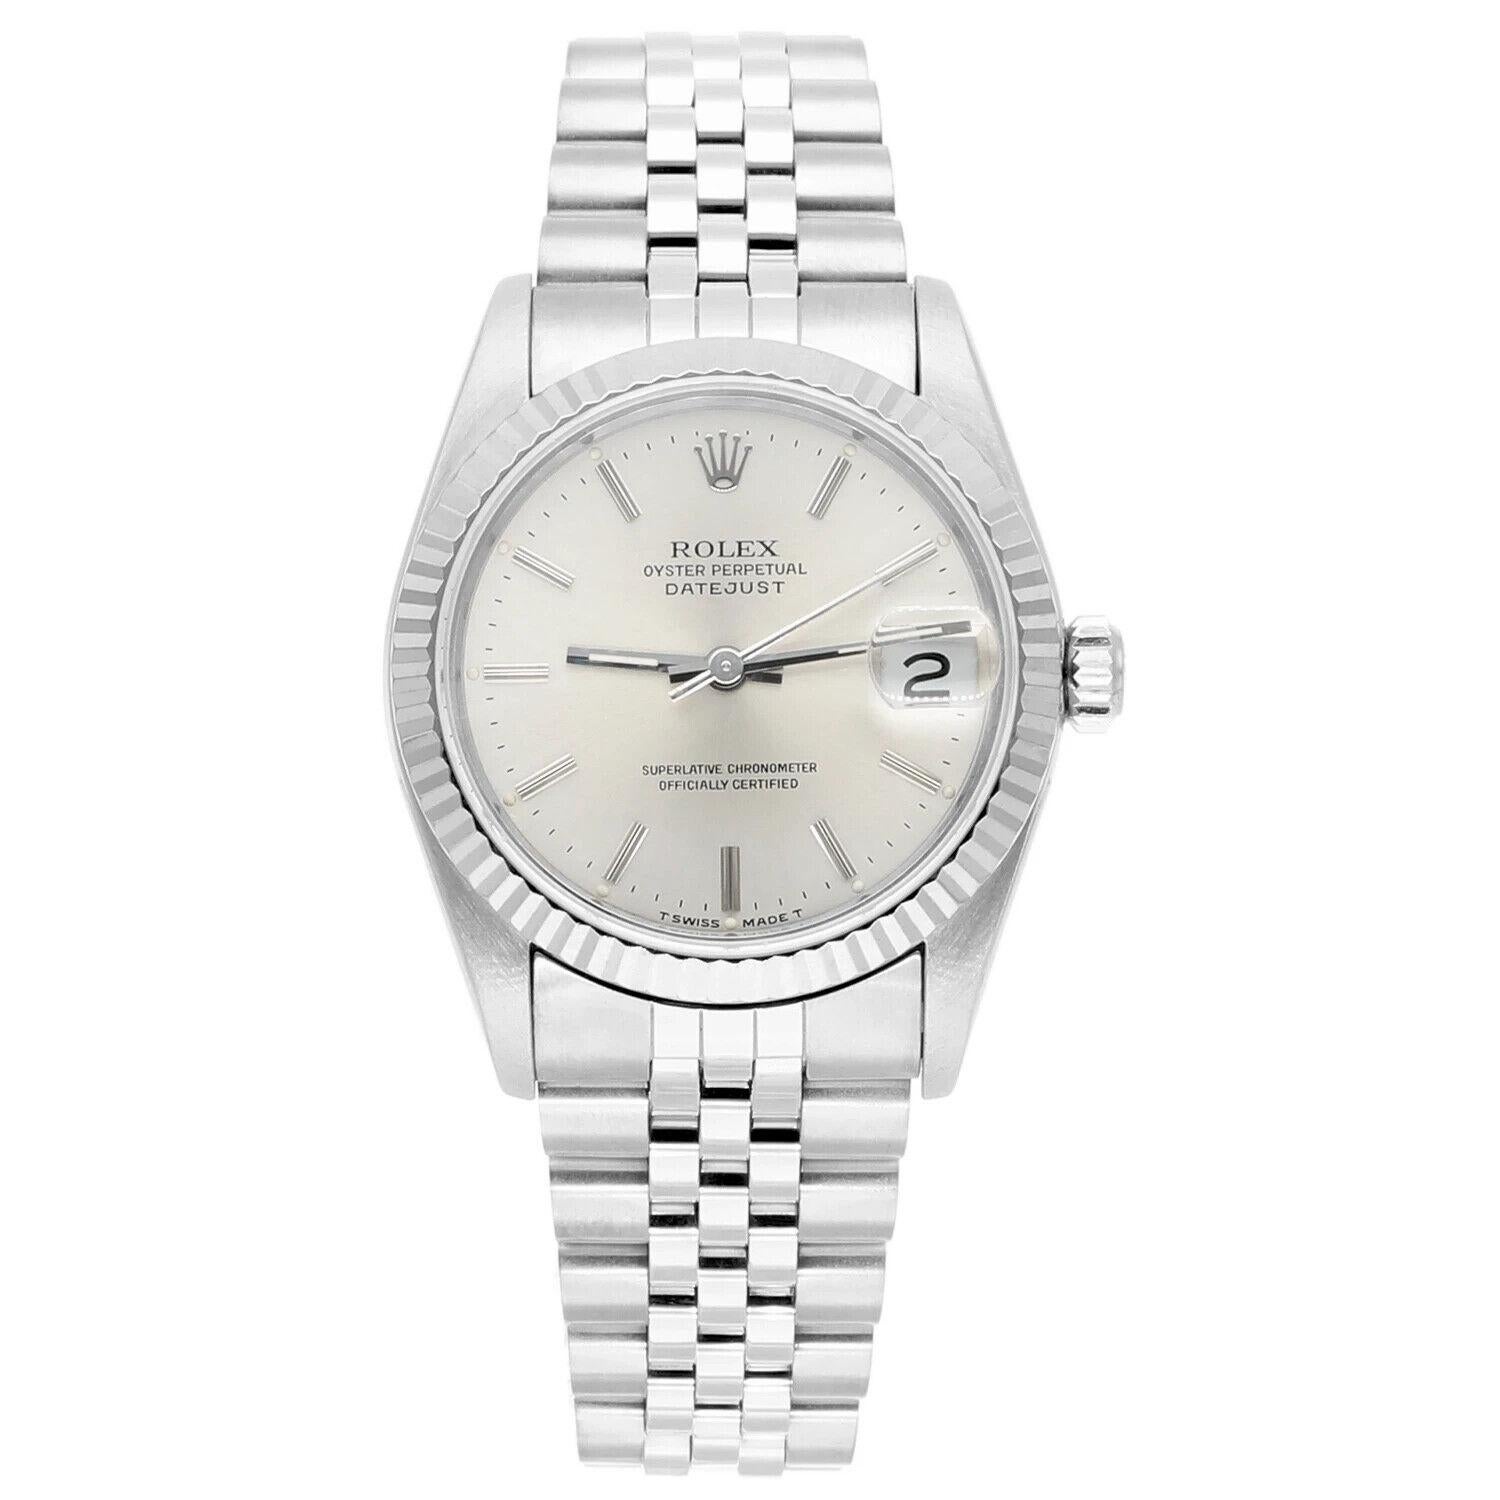 Silver-tone stainless steel case with a silver-tone stainless steel jubilee bracelet. Fixed 18kt white gold bezel. Silver-tone dial with silver-tone hands and index hour markers. Minute markers around the outer rim. Dial Type: Analog. Date display